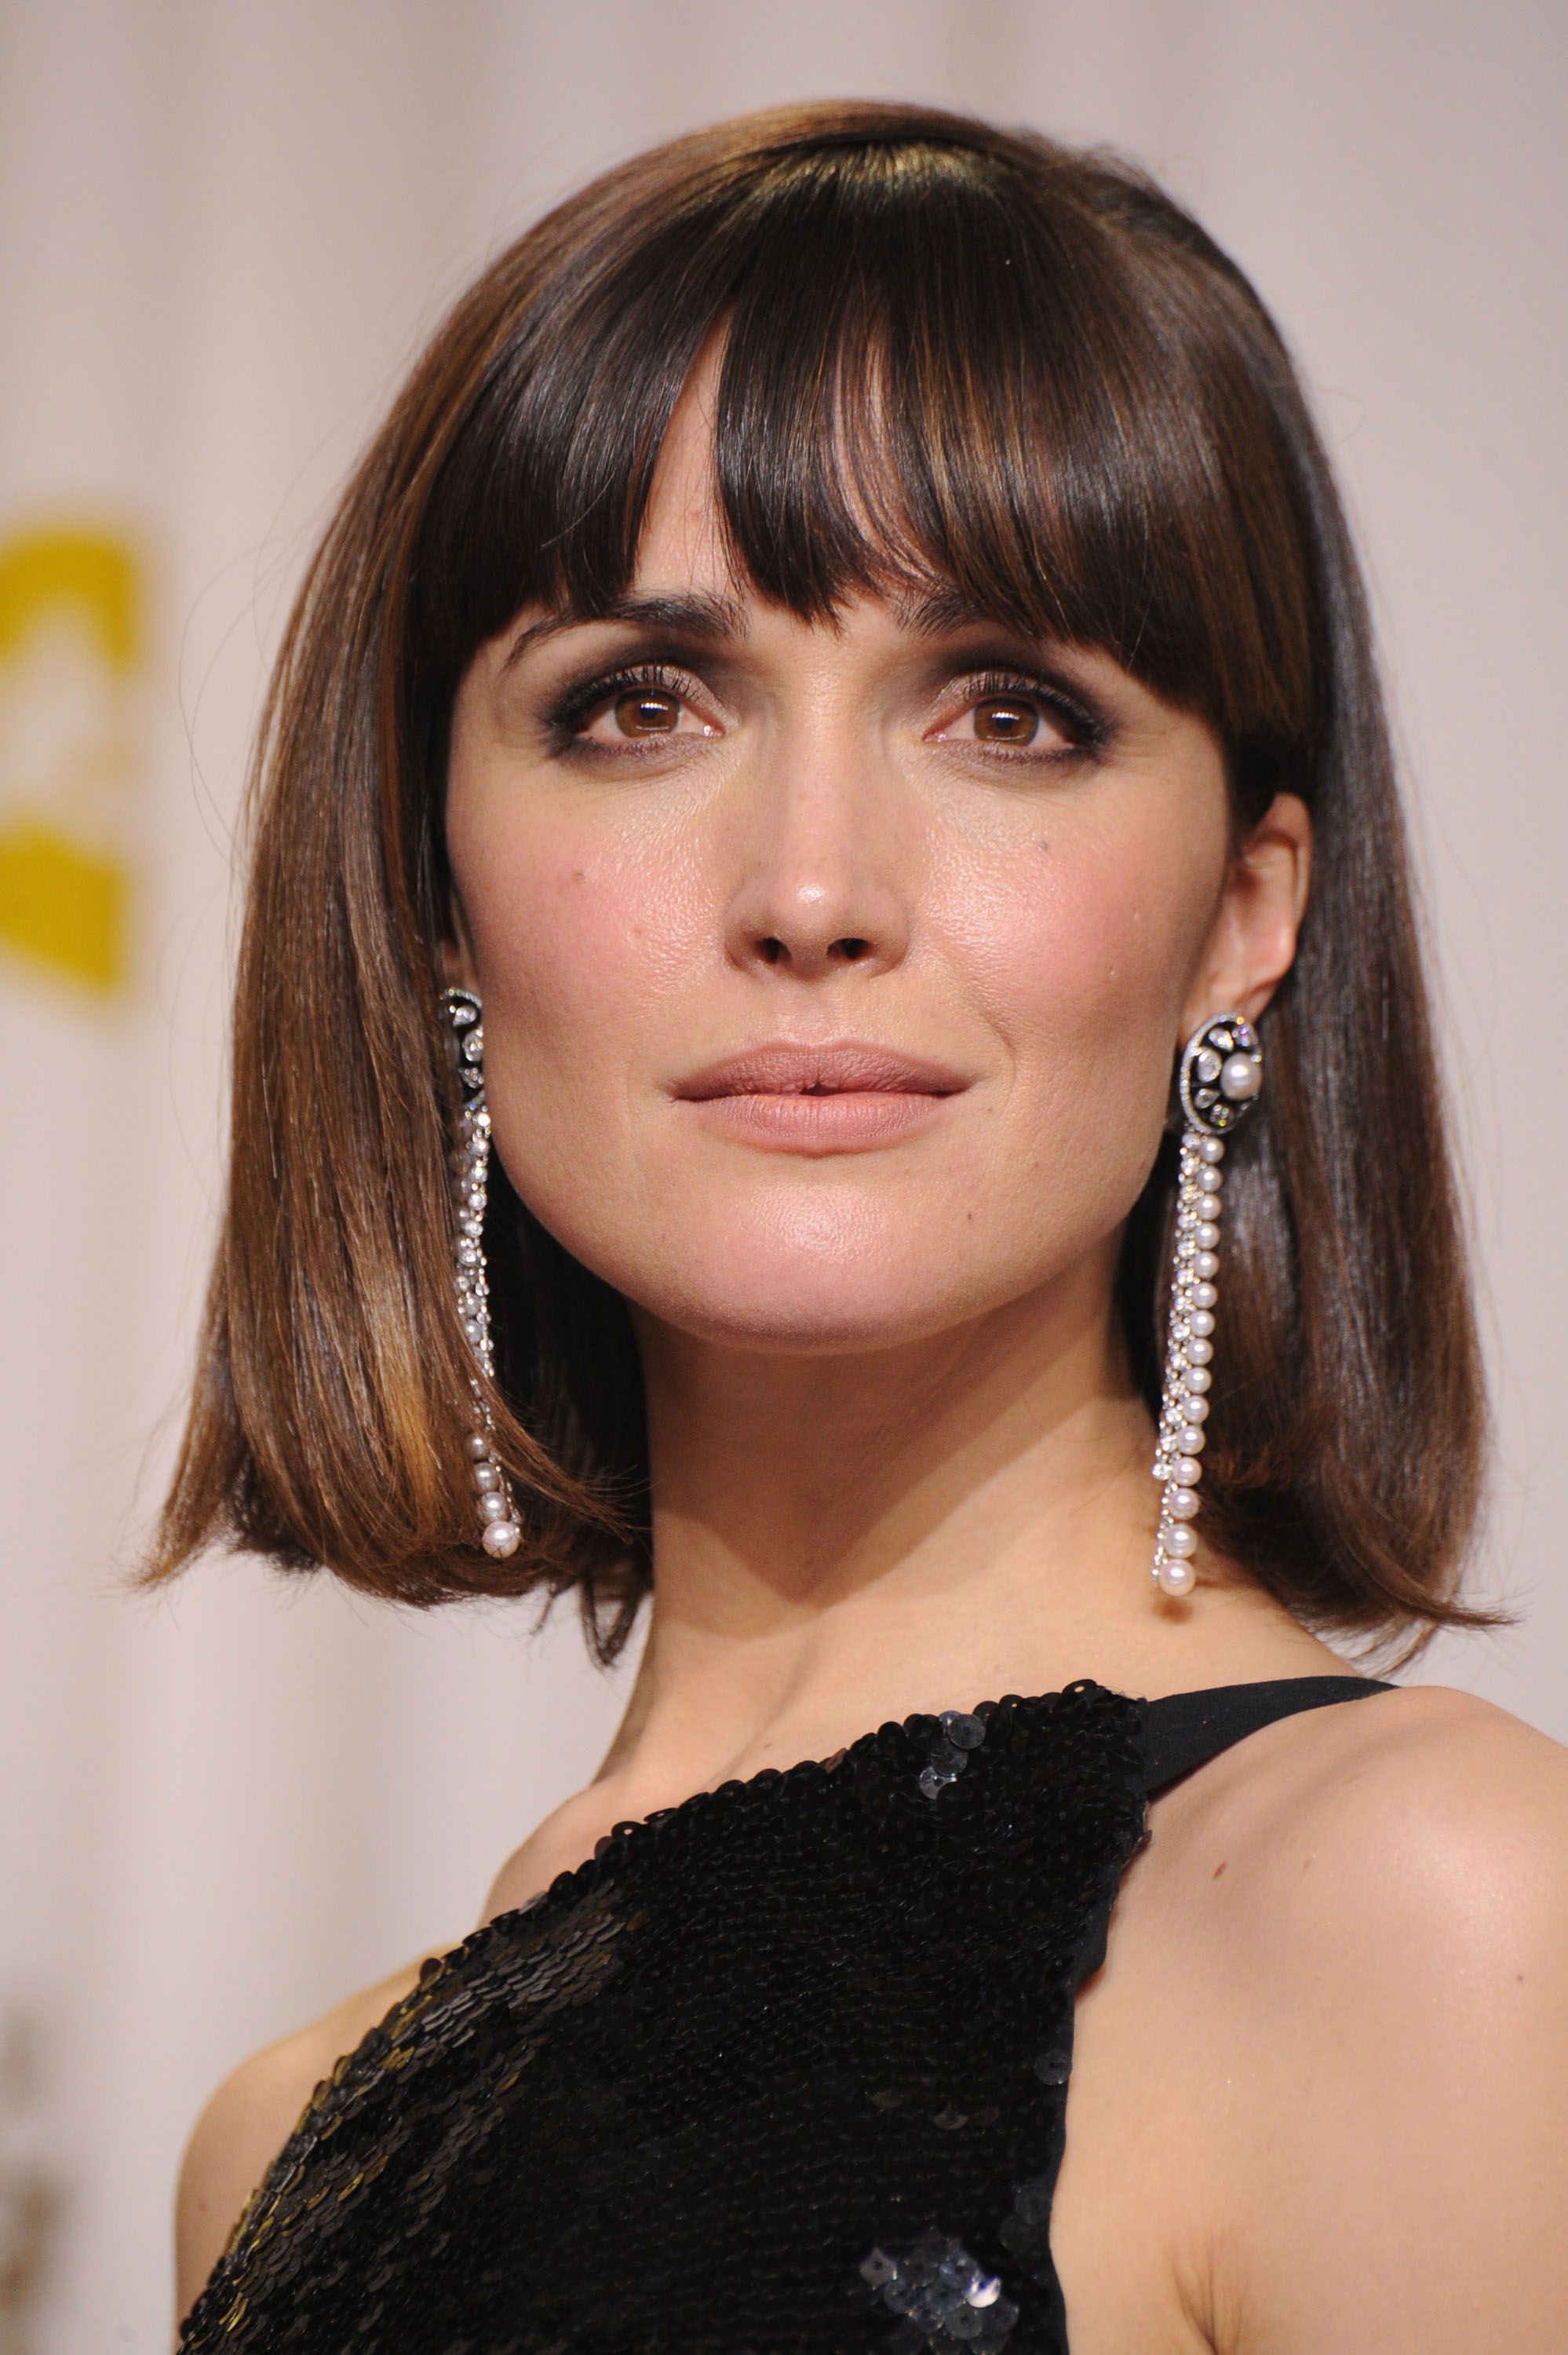 40+ Blunt Cuts & Blunt Bobs That'll Never Go Out of Style - Hairstyles  Weekly